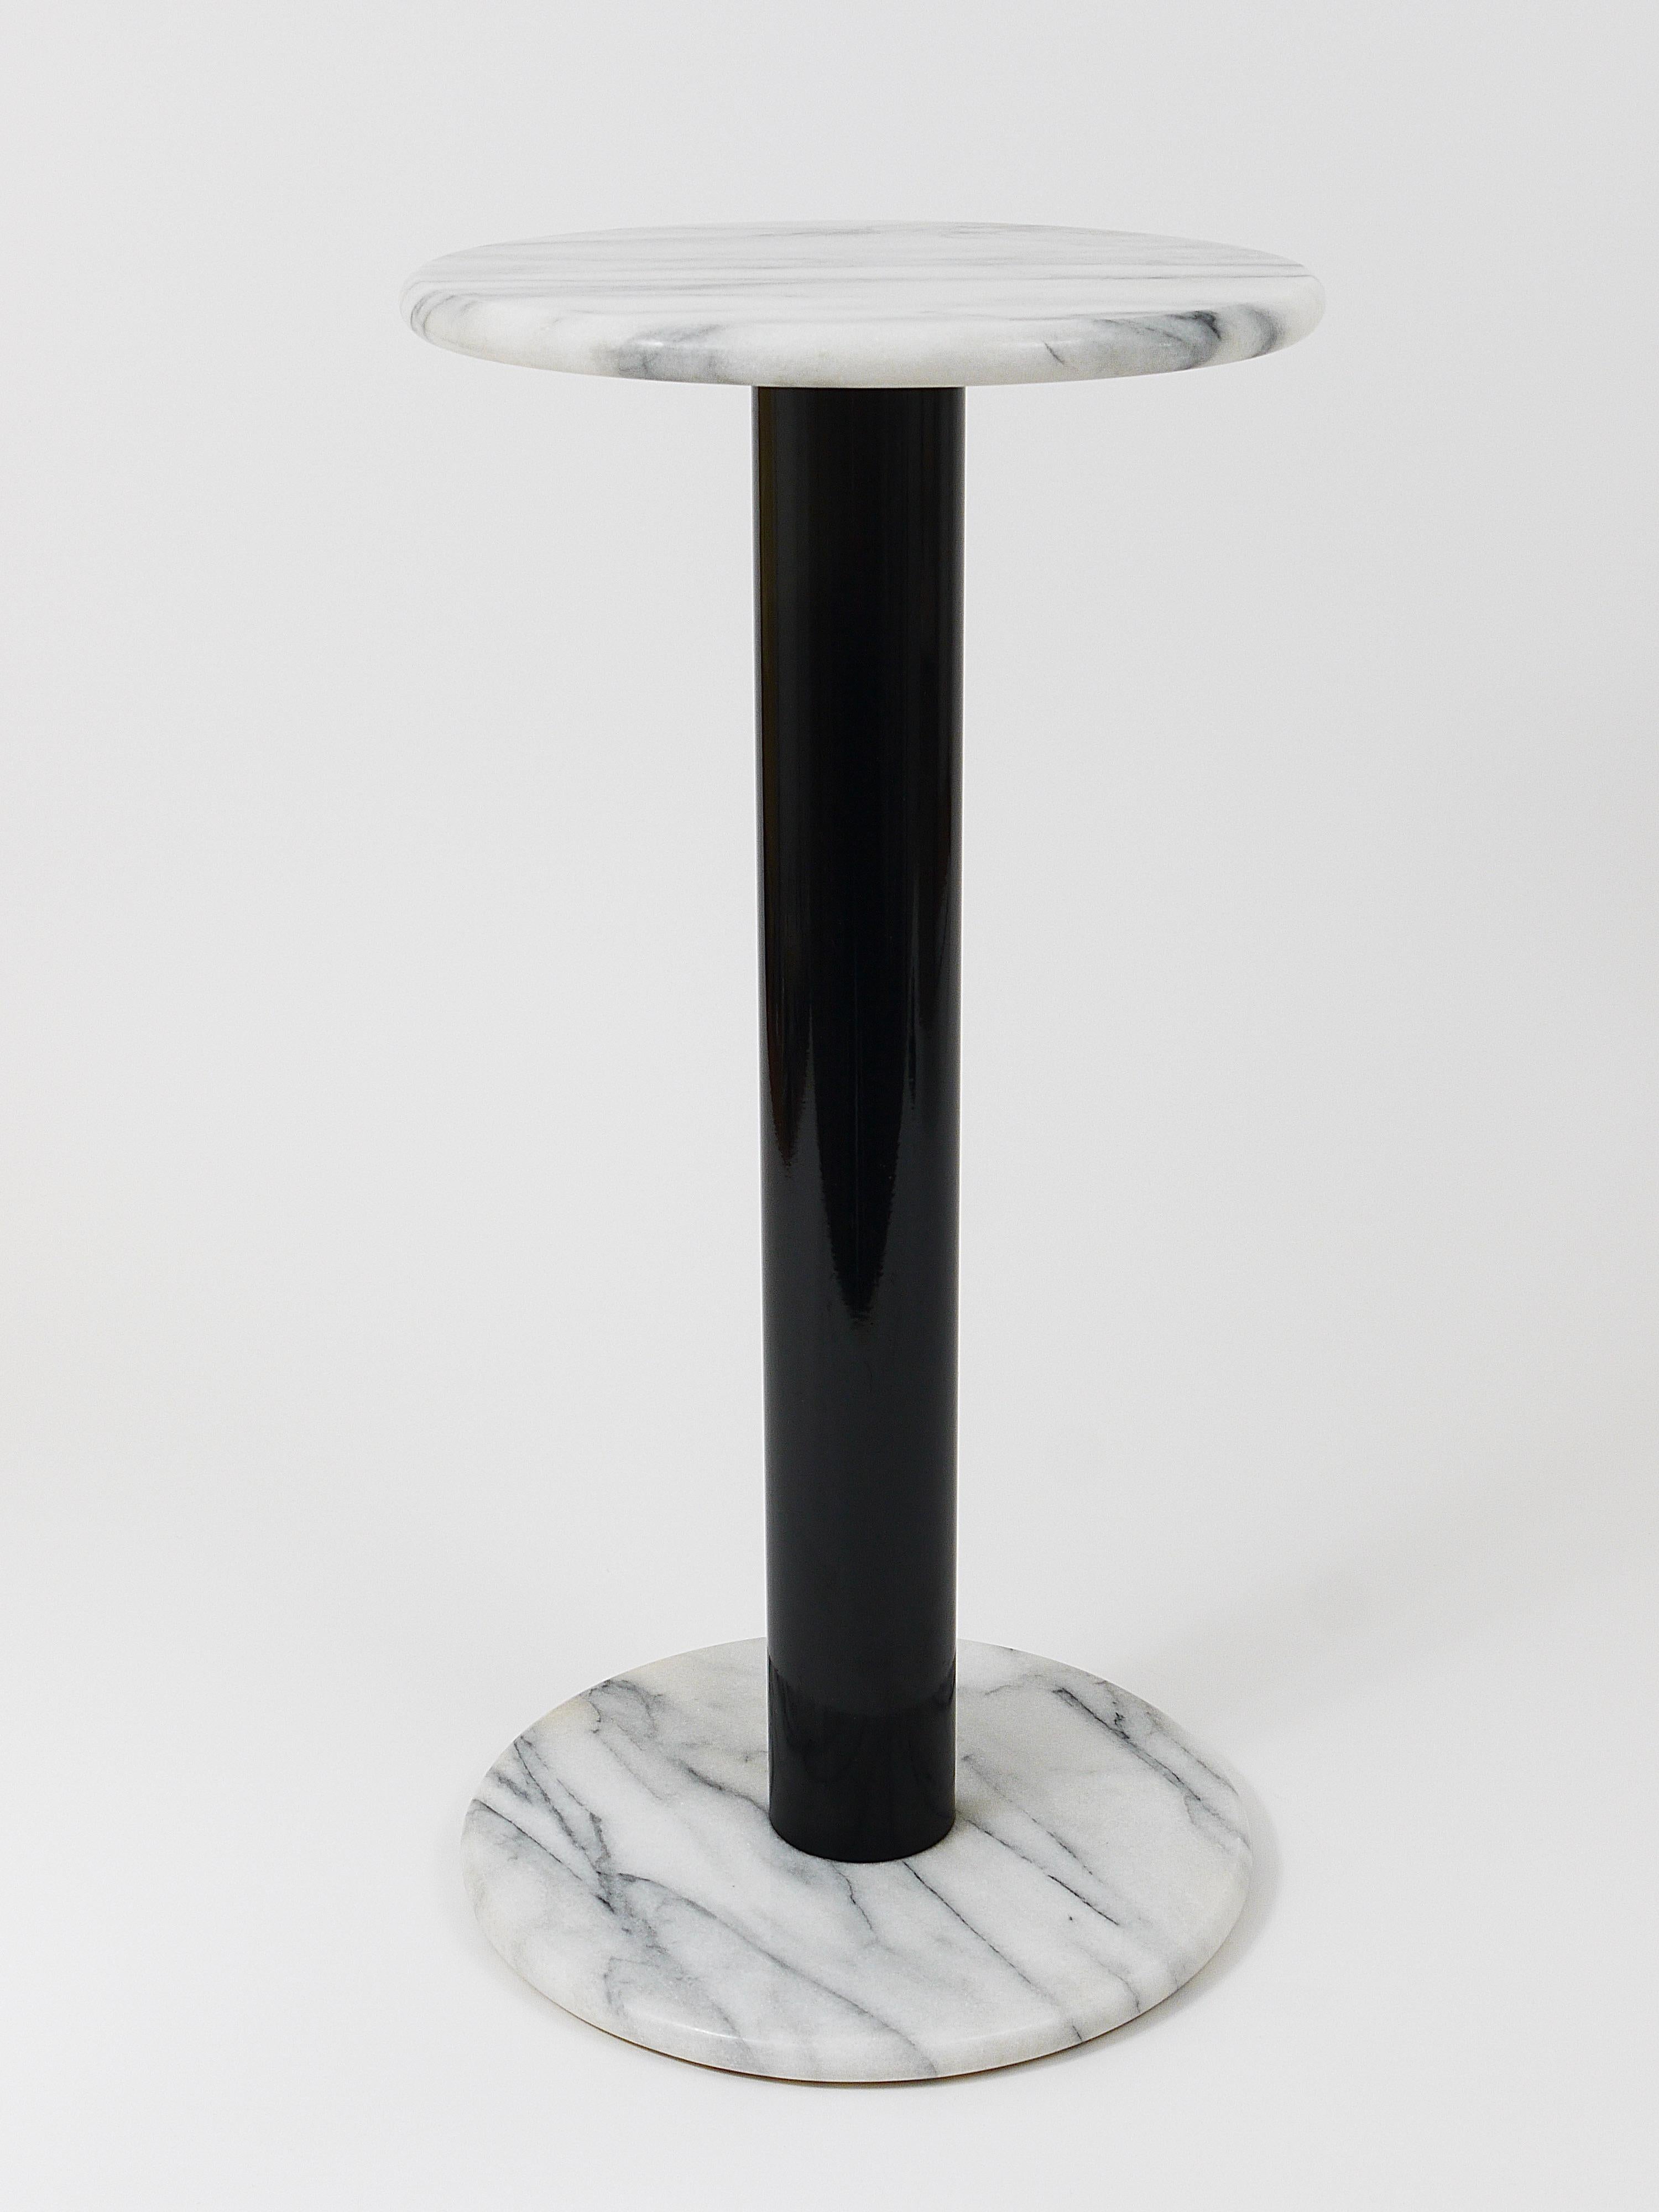 Postmodern White Carrara Marble Flower Stand Pedestal Table, Italy, 1980s For Sale 9